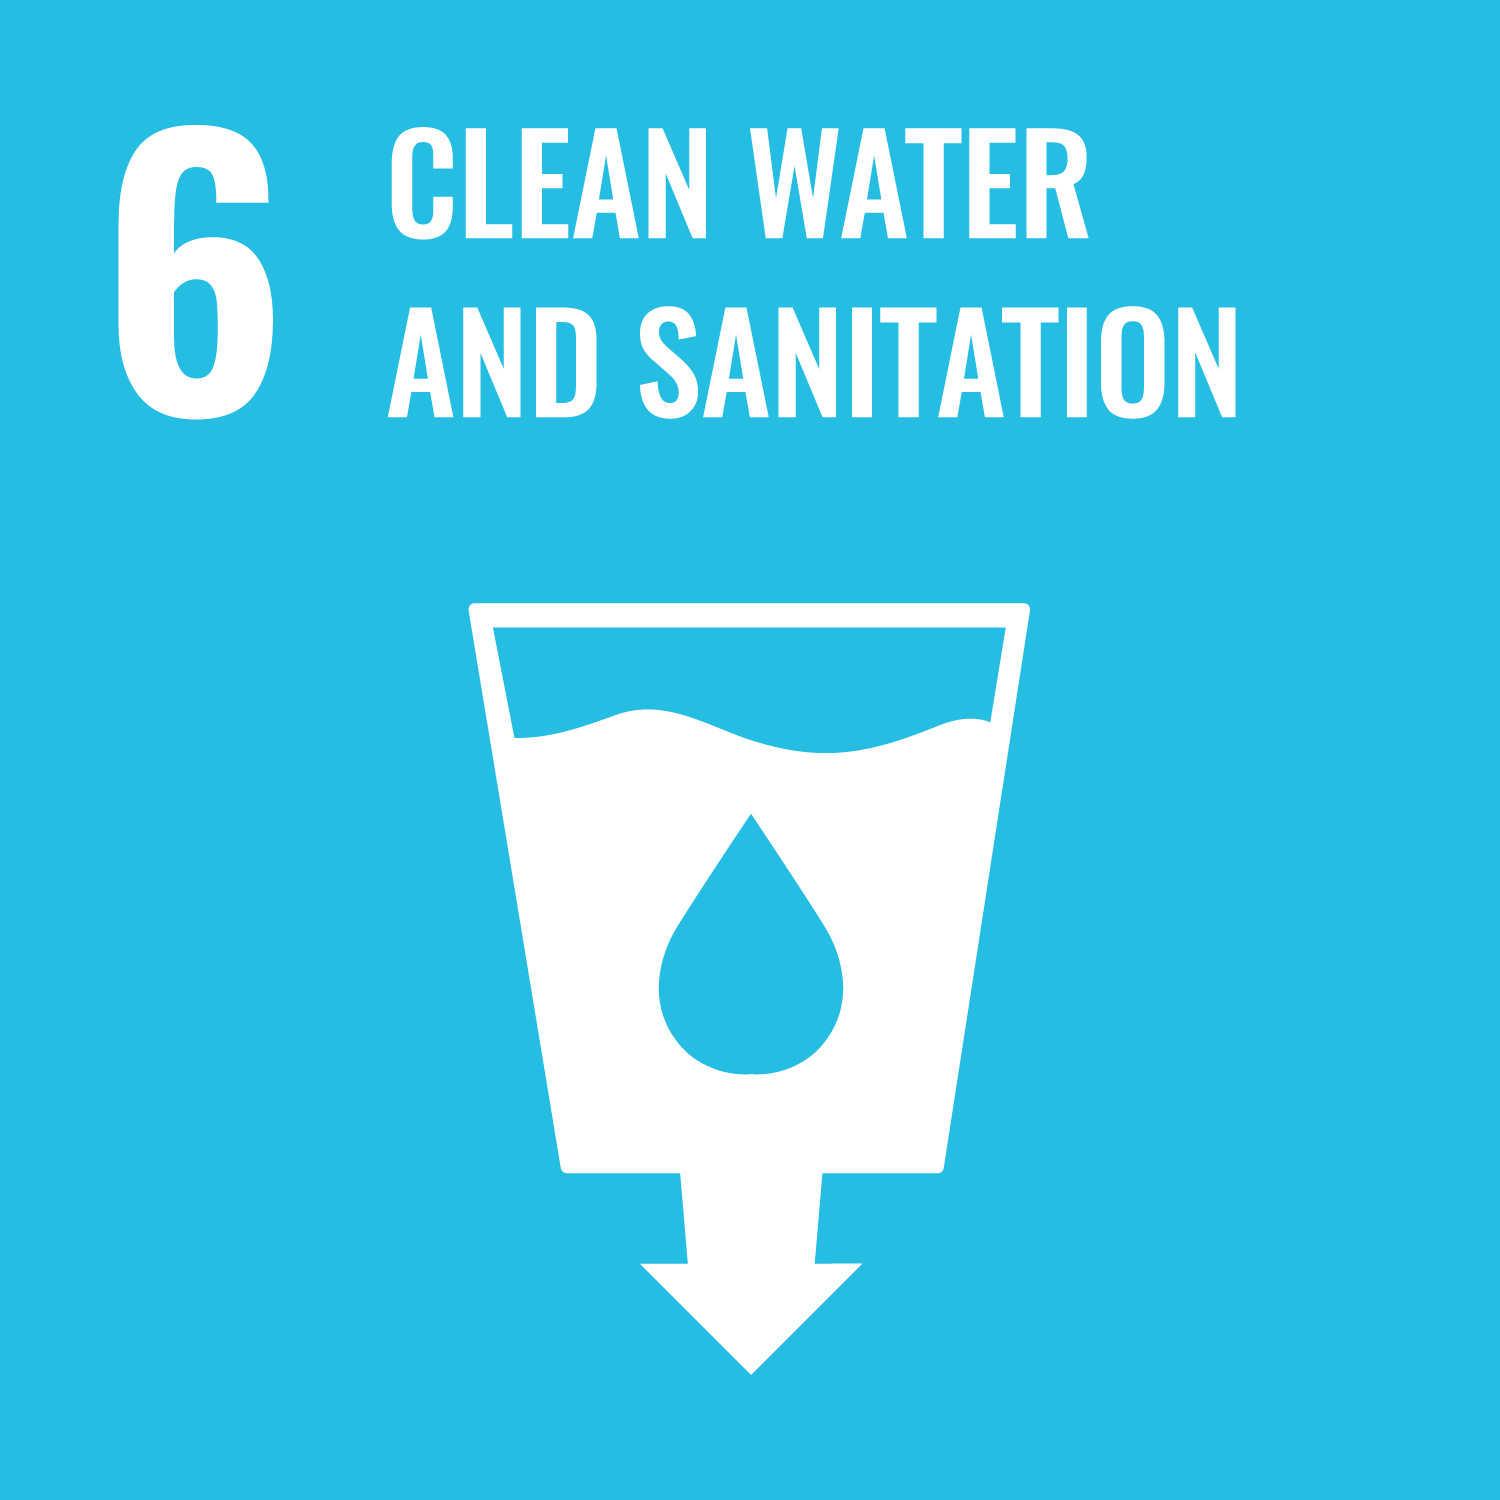 SDGs Goal 6 Clean Water and Sanitation cover image